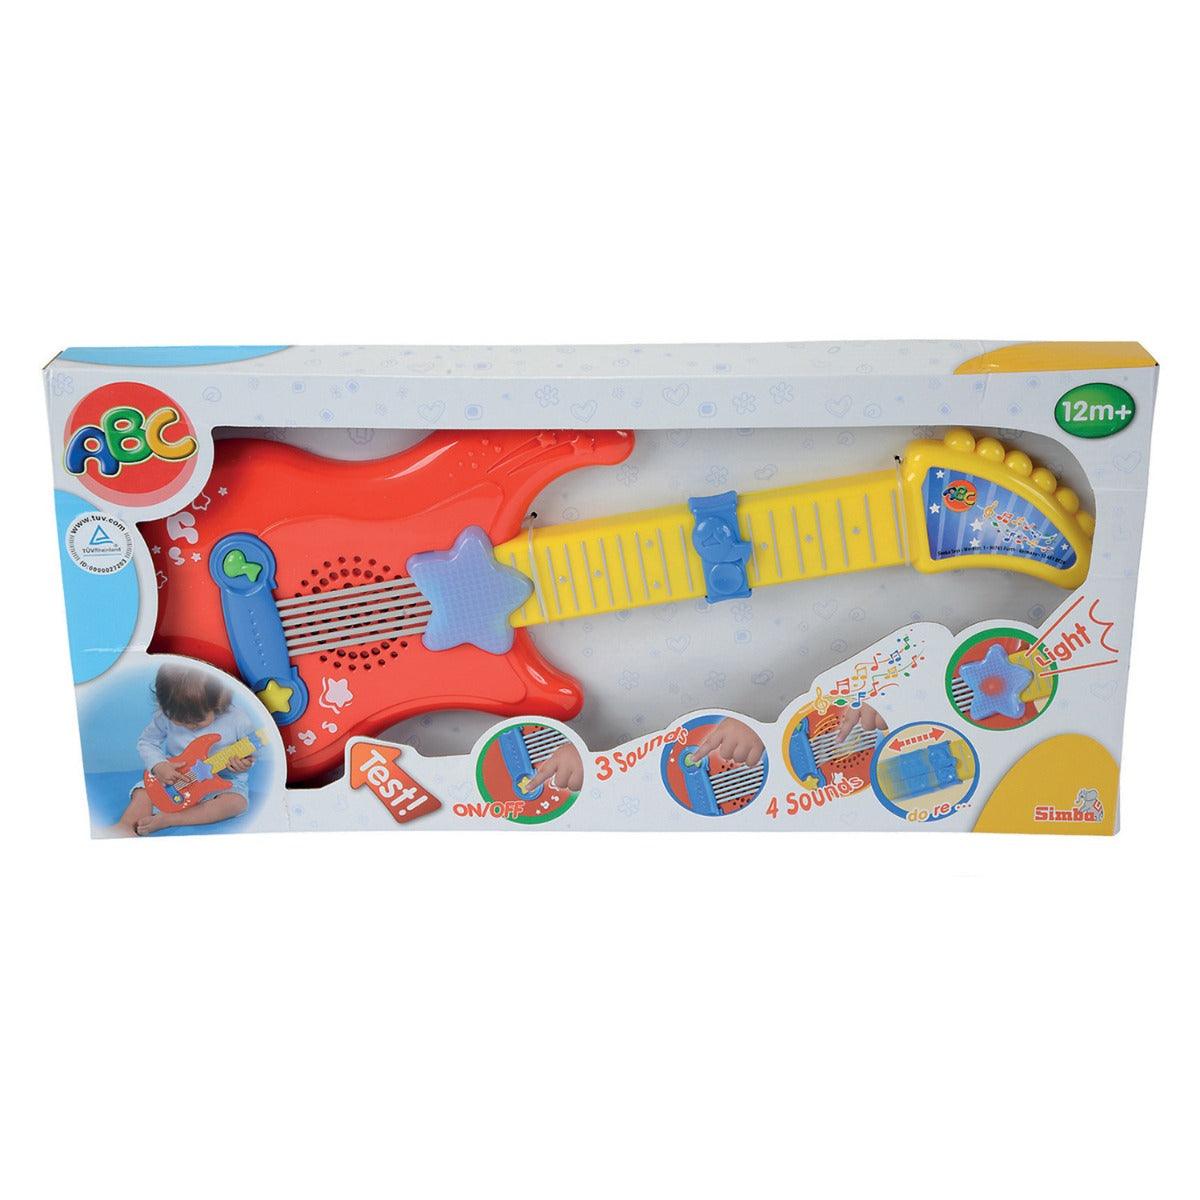 Simba Plastic ABC Baby Guitar with Light and Sound